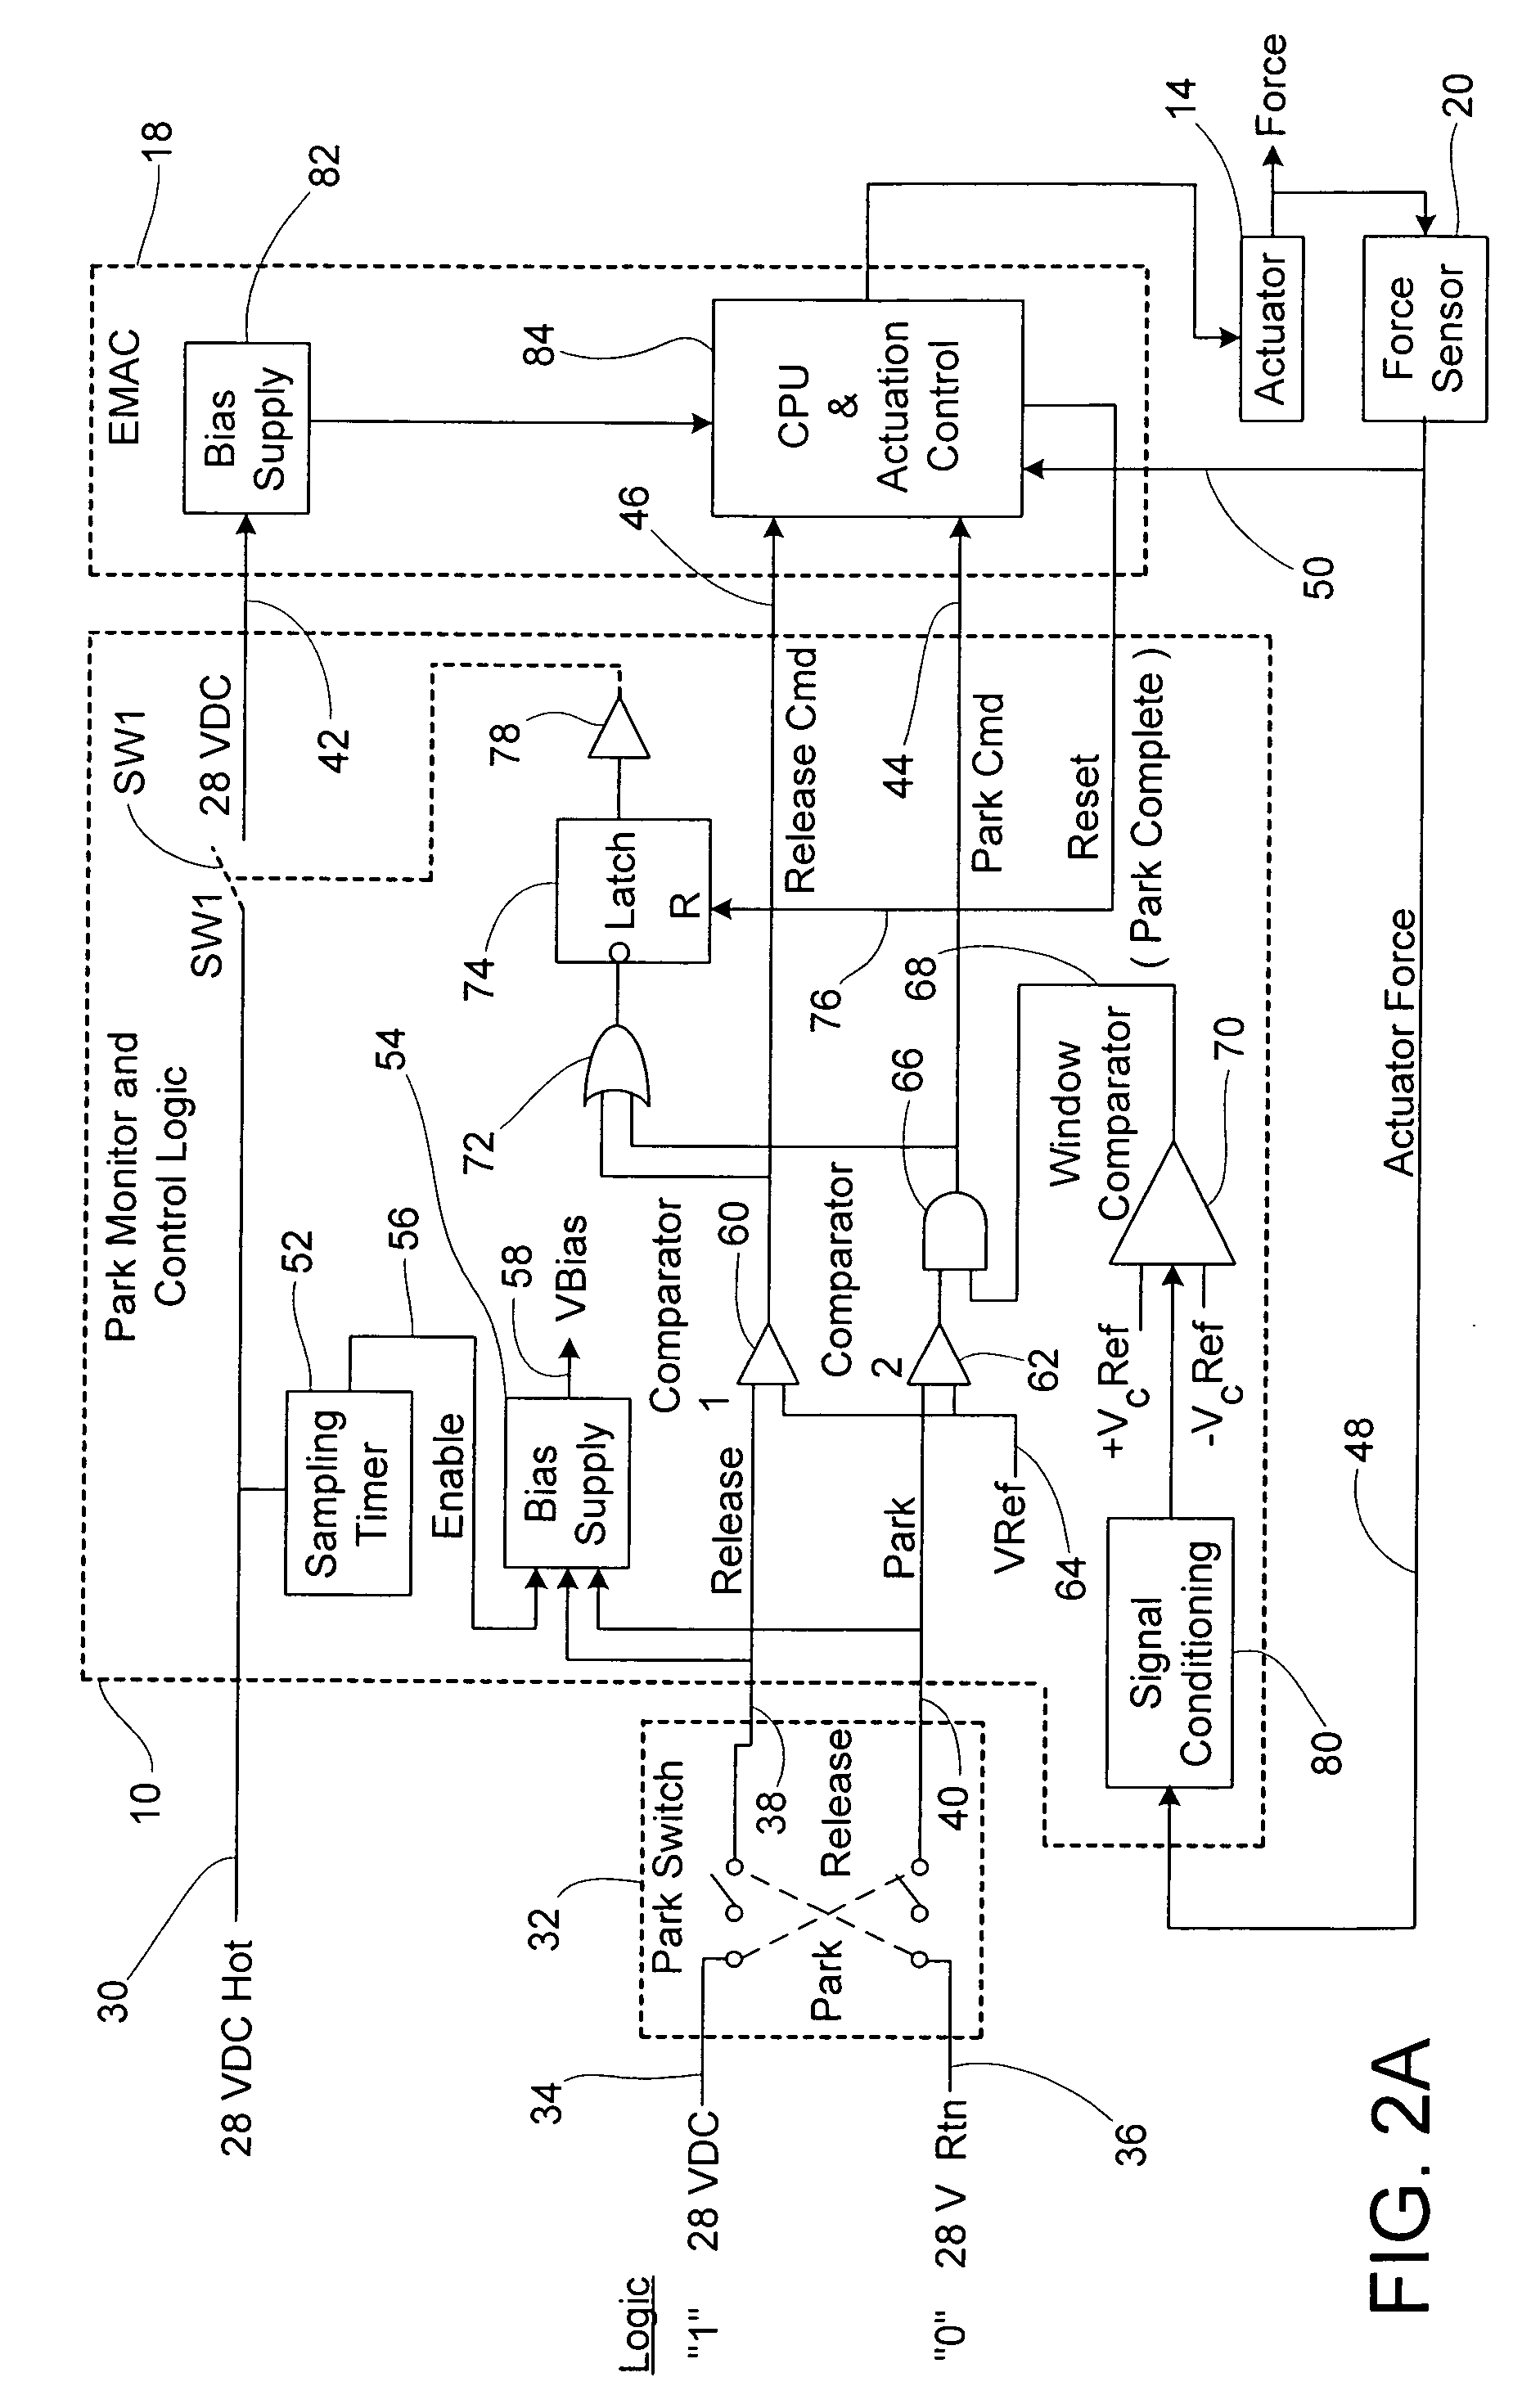 Low power parking brake force adjustment apparatus and method for electrically actuated brake systems